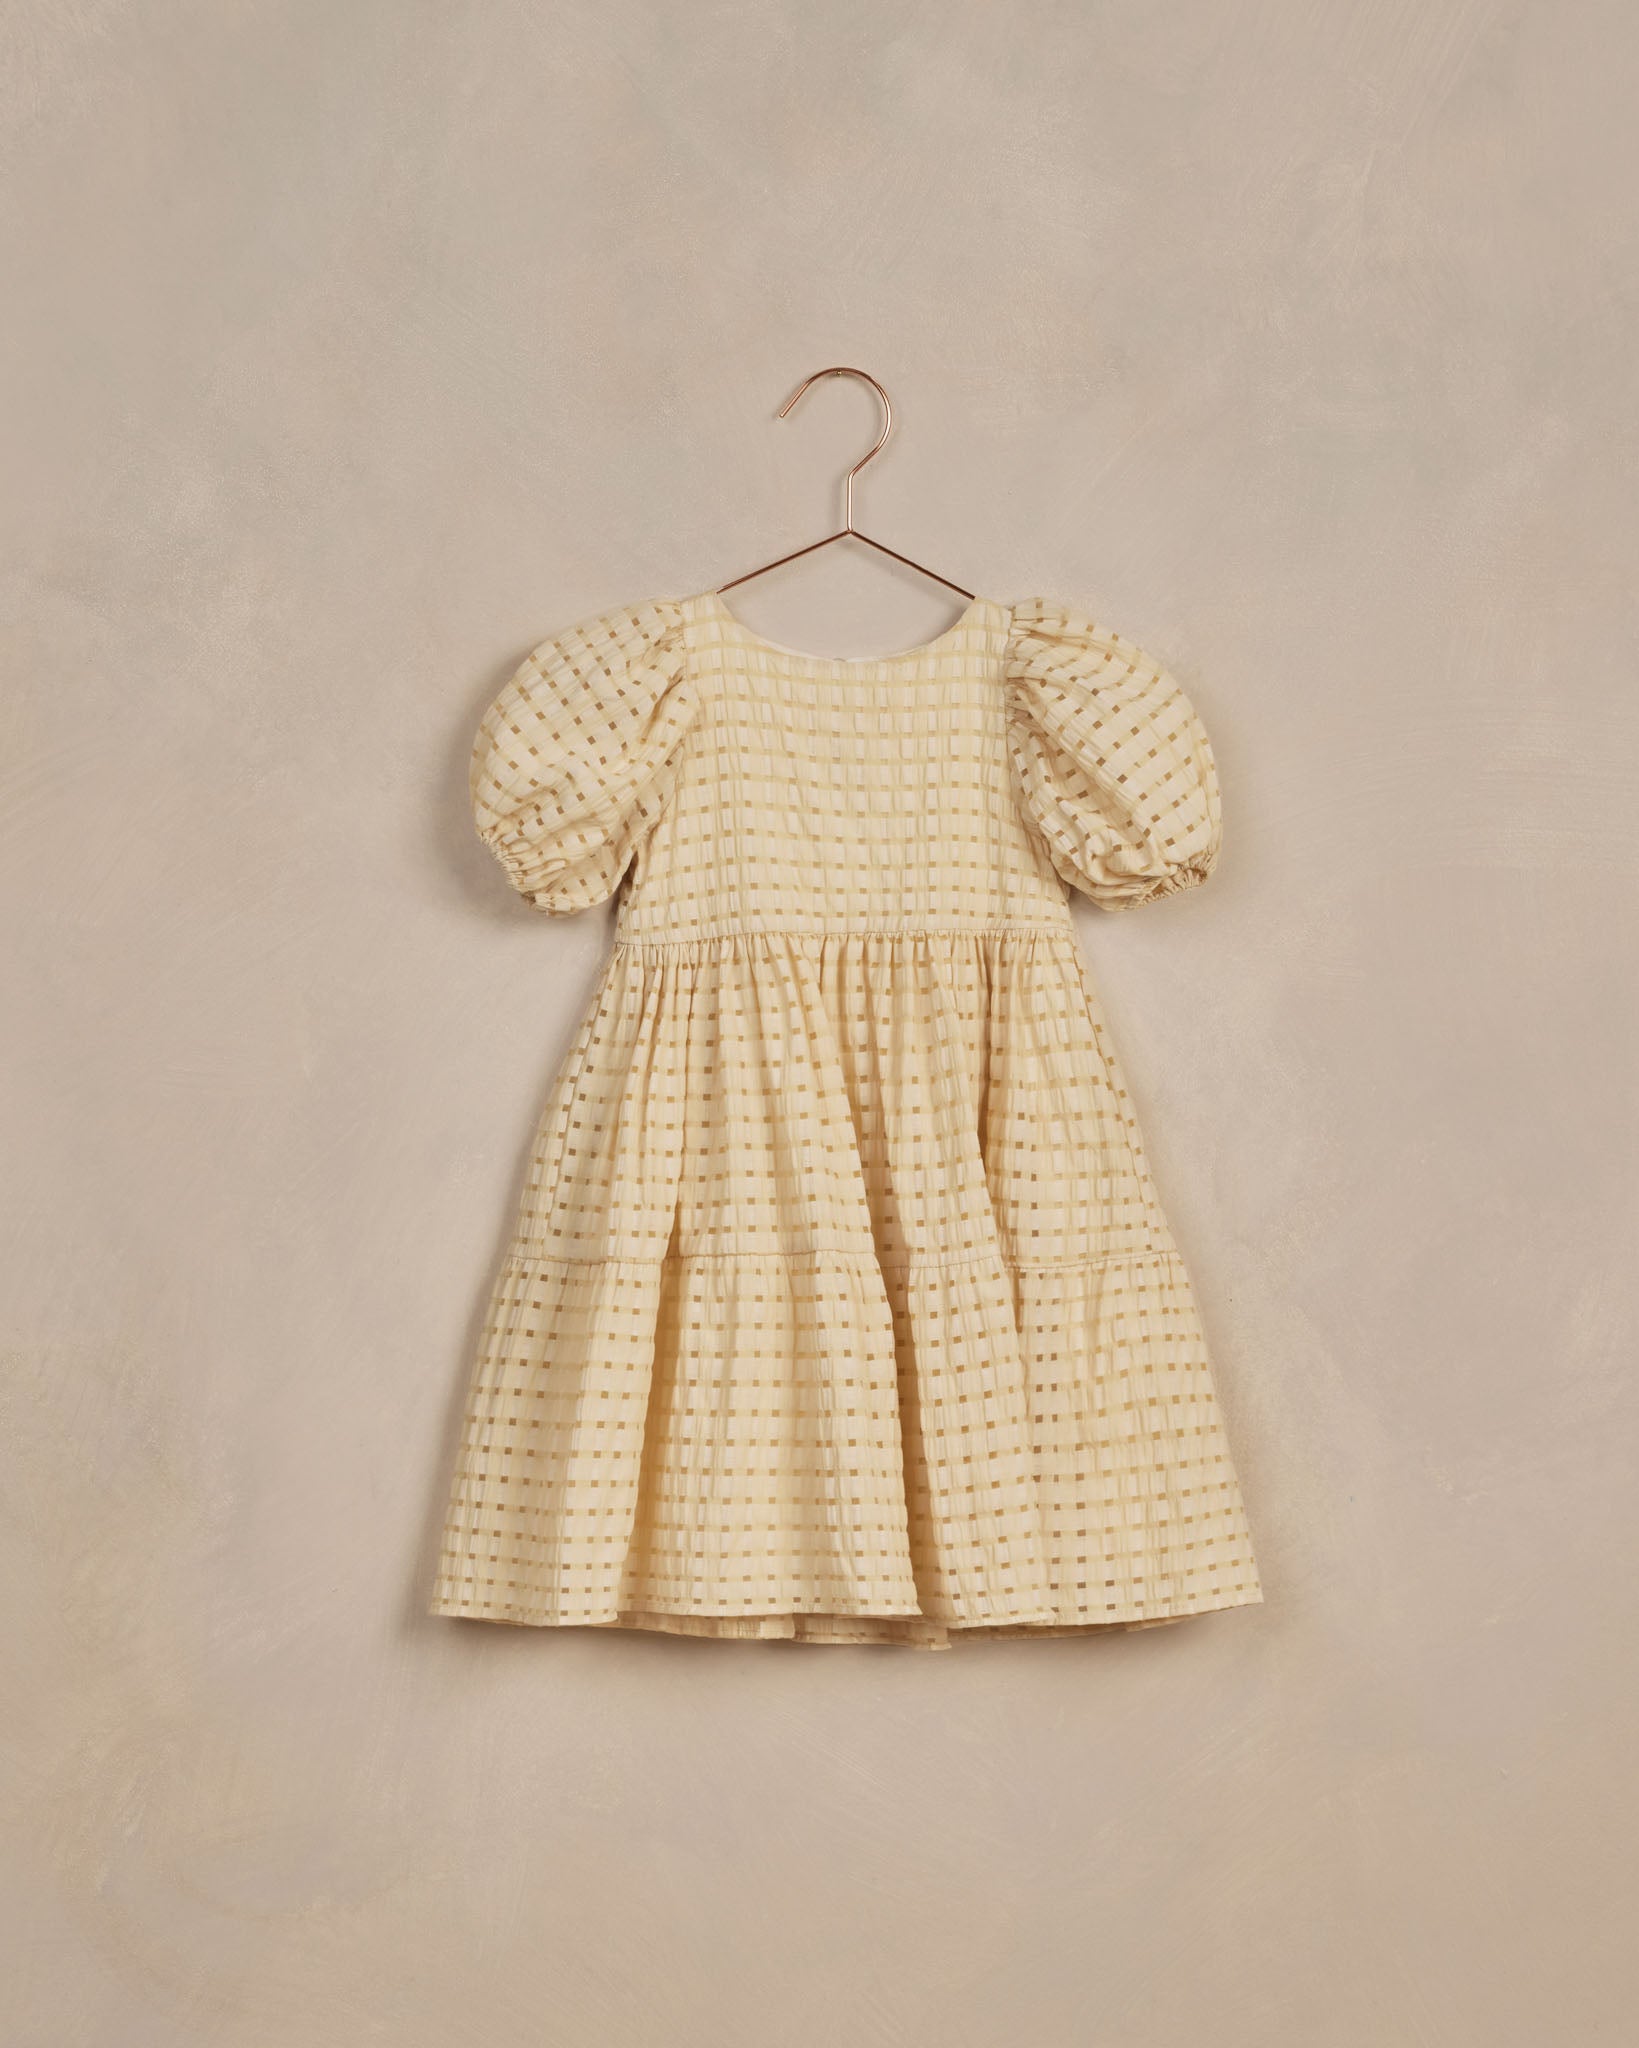 Chloe Dress || Lemon Check - Rylee + Cru | Kids Clothes | Trendy Baby Clothes | Modern Infant Outfits |